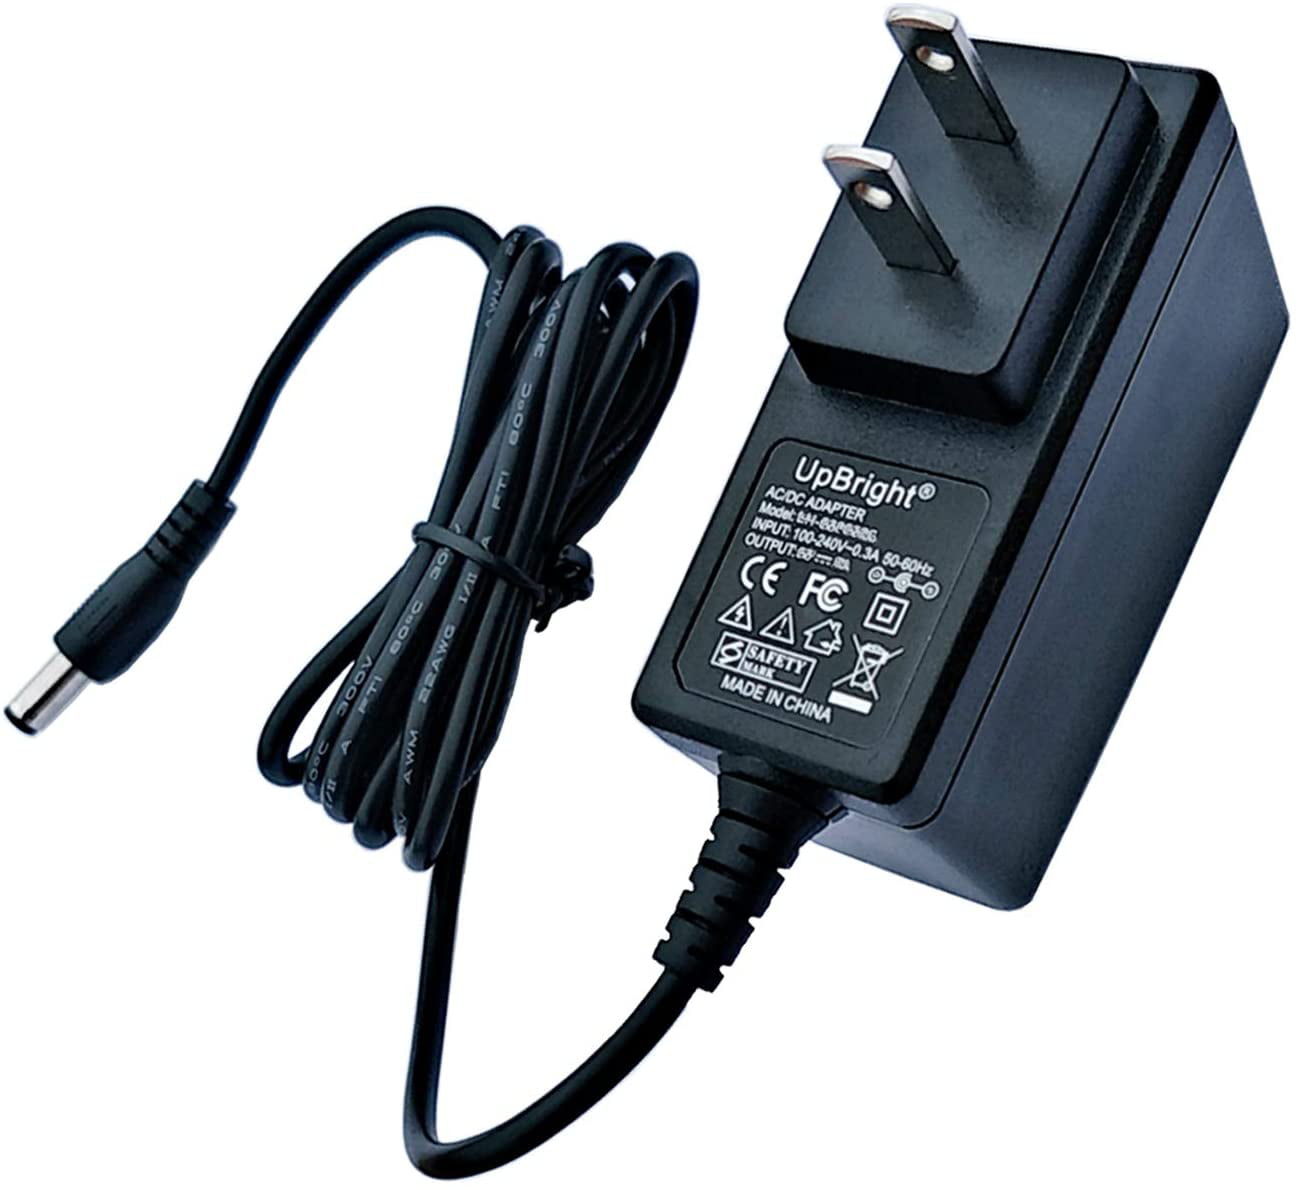 UpBright 12V AC/DC Adapter Compatible with ViewSonic NMP-570W NMP580-W NMP570W NMP580W Network Media Player Model VS14604 VS16291 T2A114200042 VSWM01 Y9EPWA-01XXX 12VDC Power Supply Battery Charger - image 1 of 5